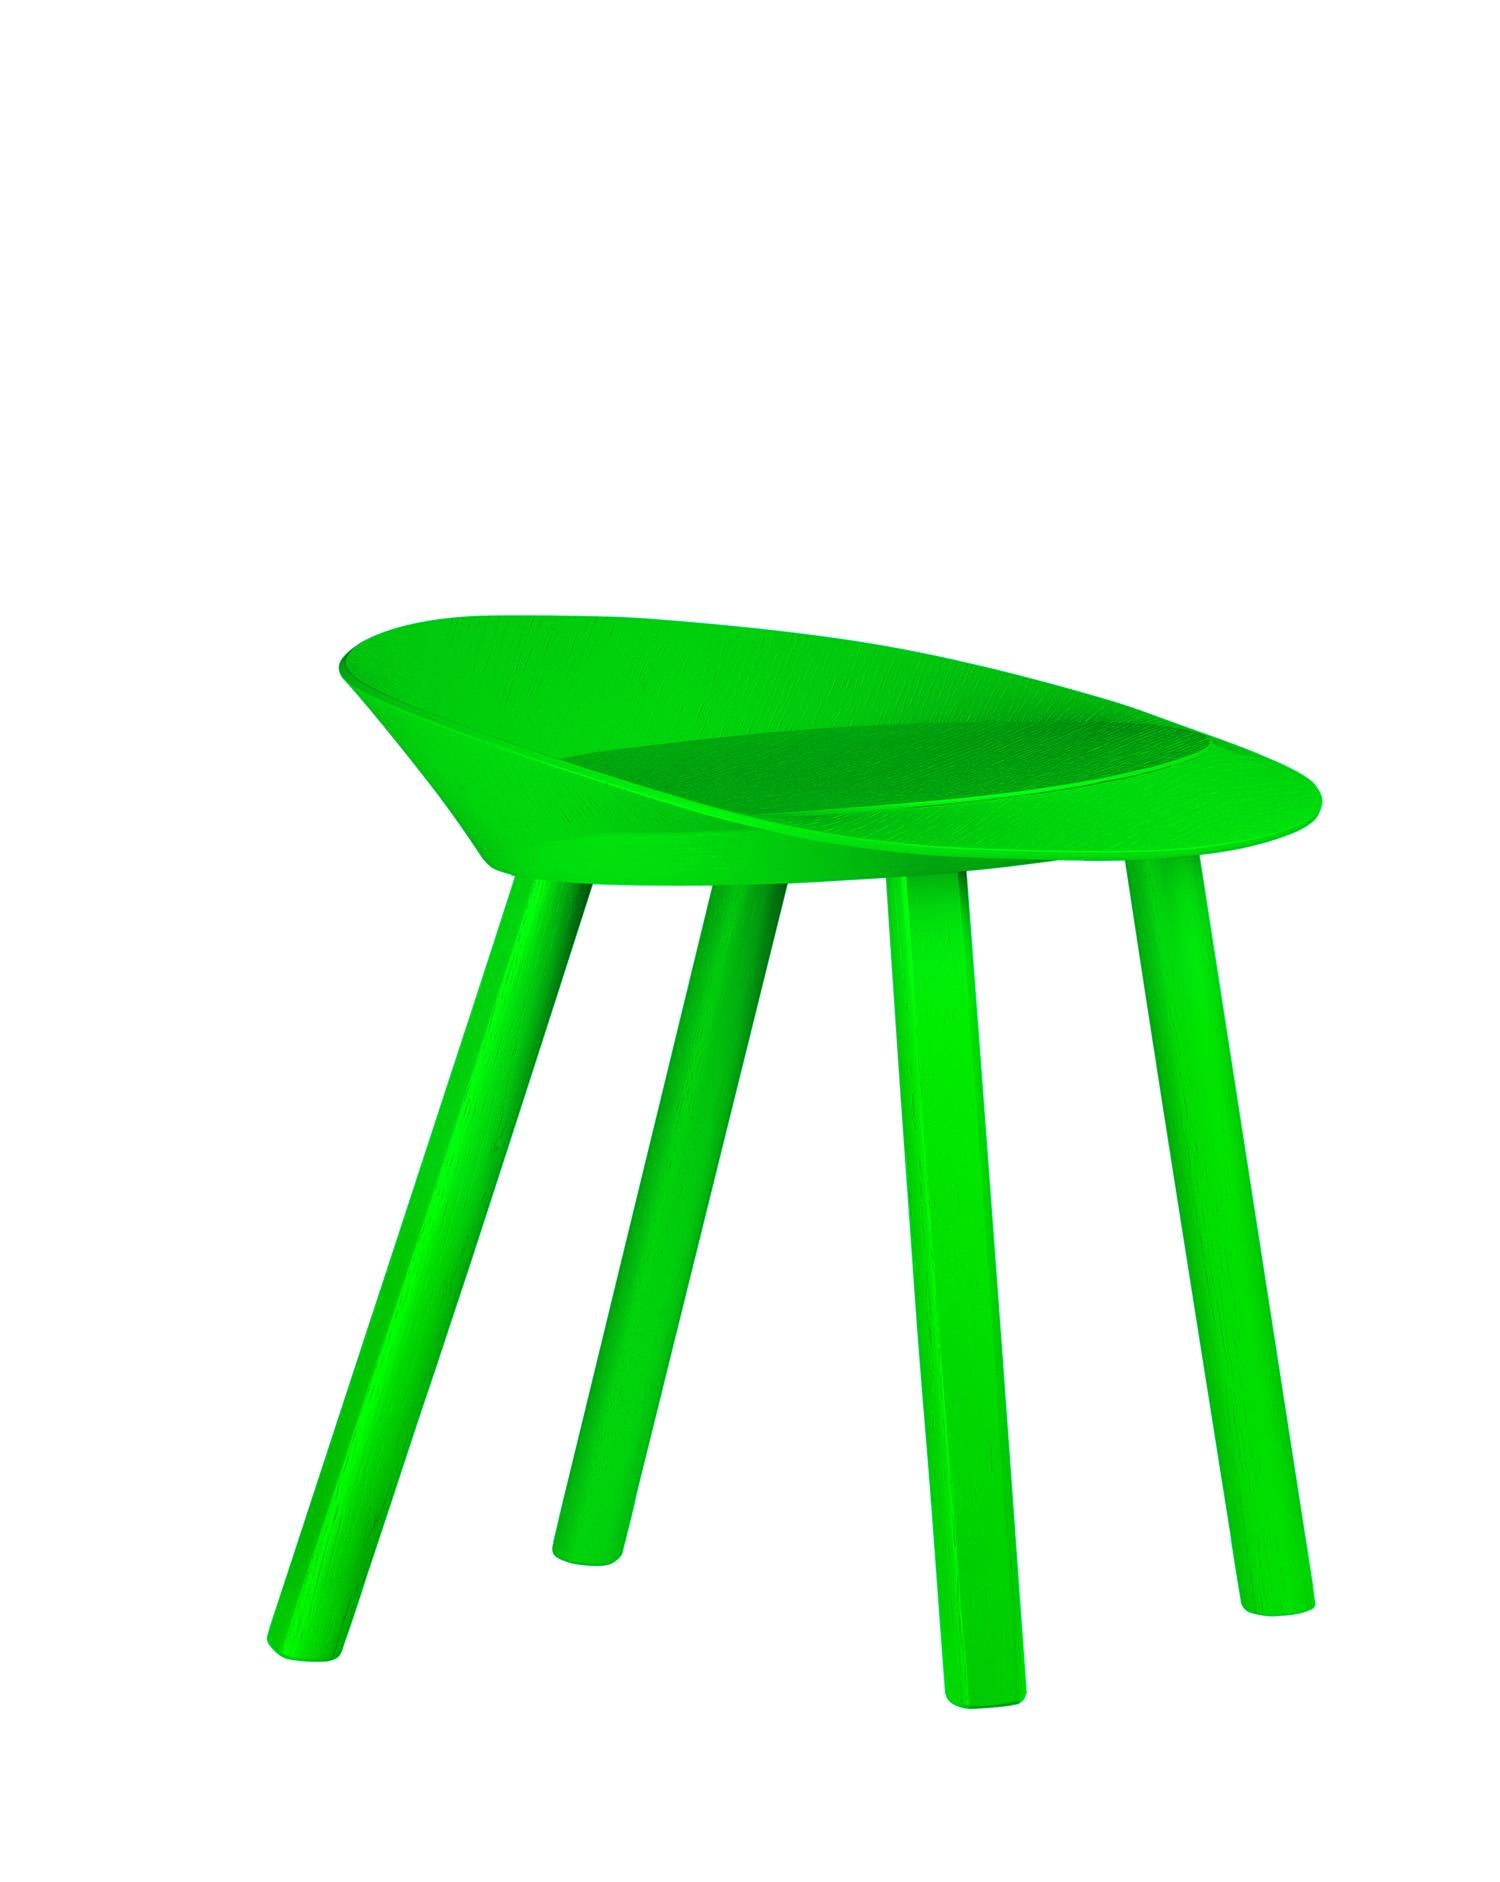 For Sale: Green (Atomic Green Lacquer) e15 Mr. Collins Stool by Stefan Diez